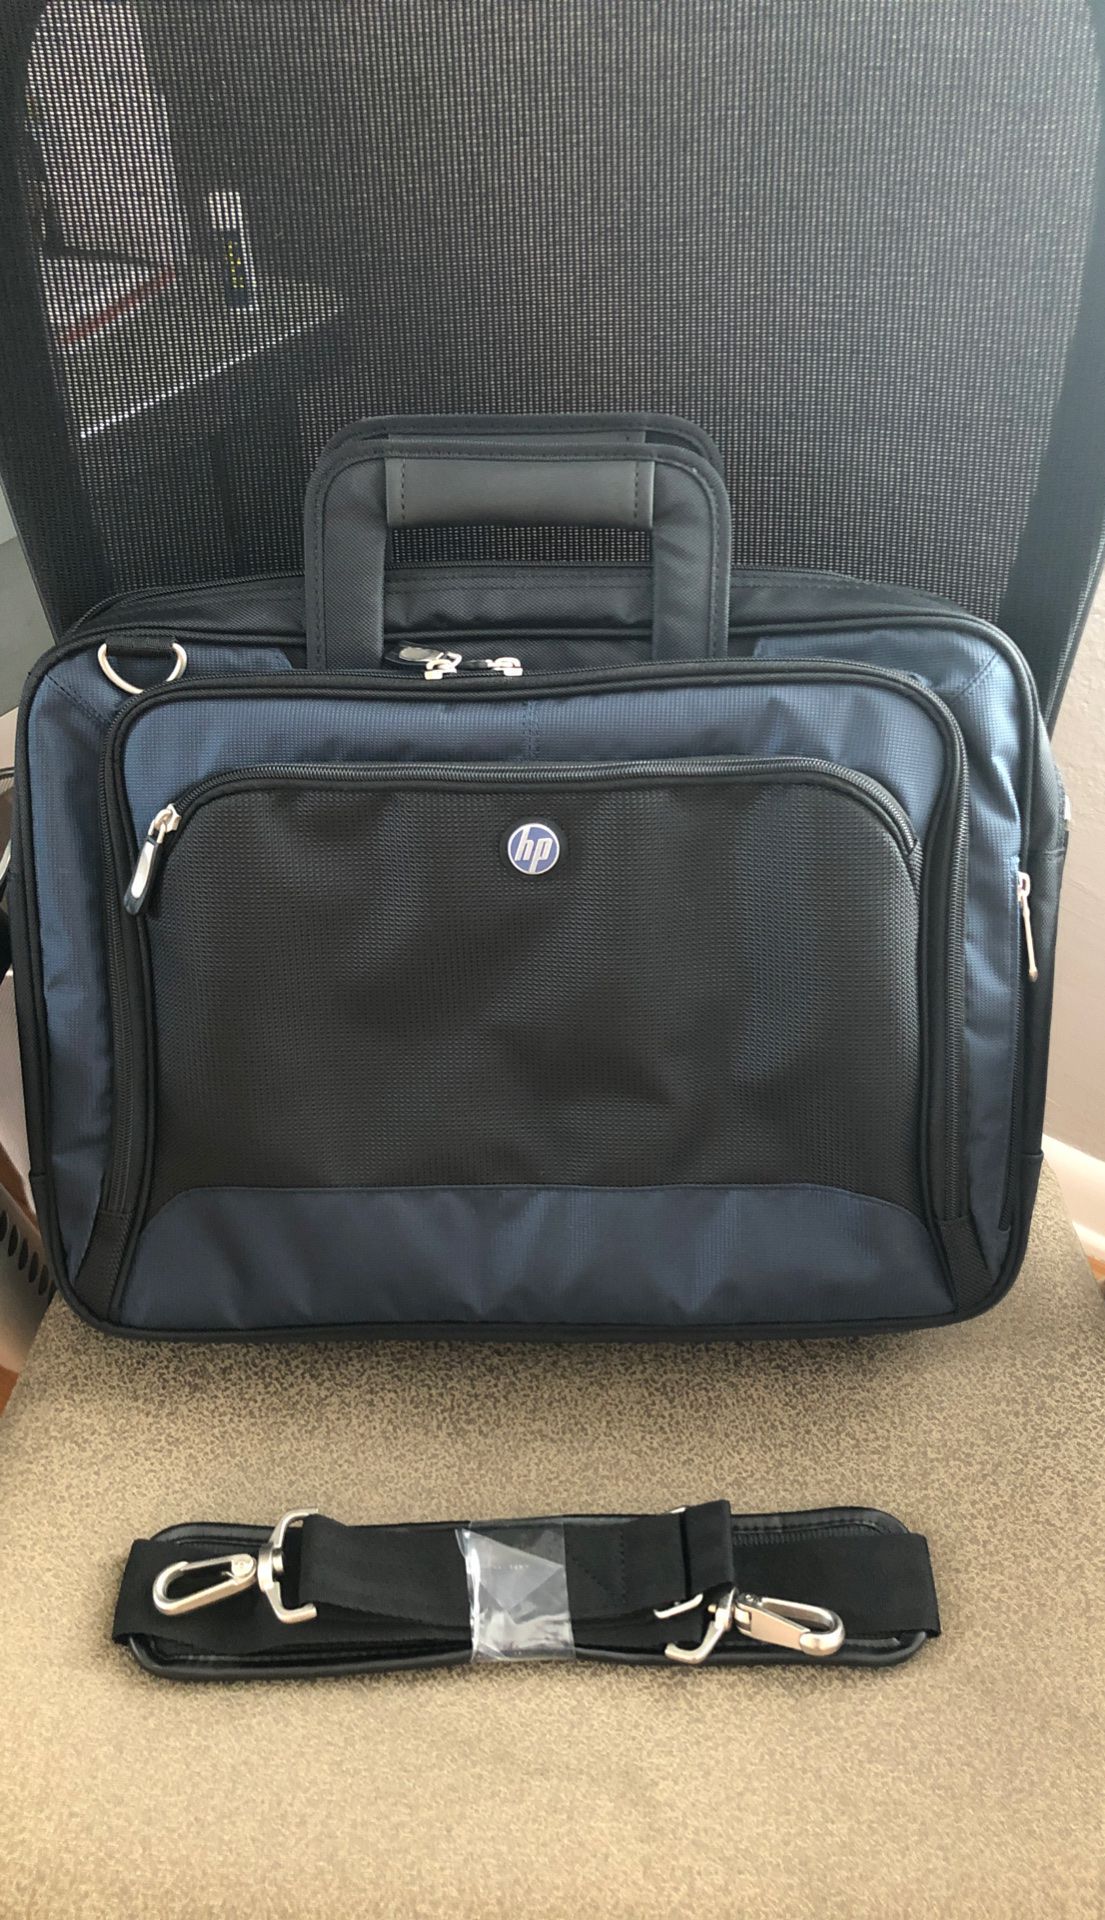 HP Laptop Bag / Carrying Case NEVER USED